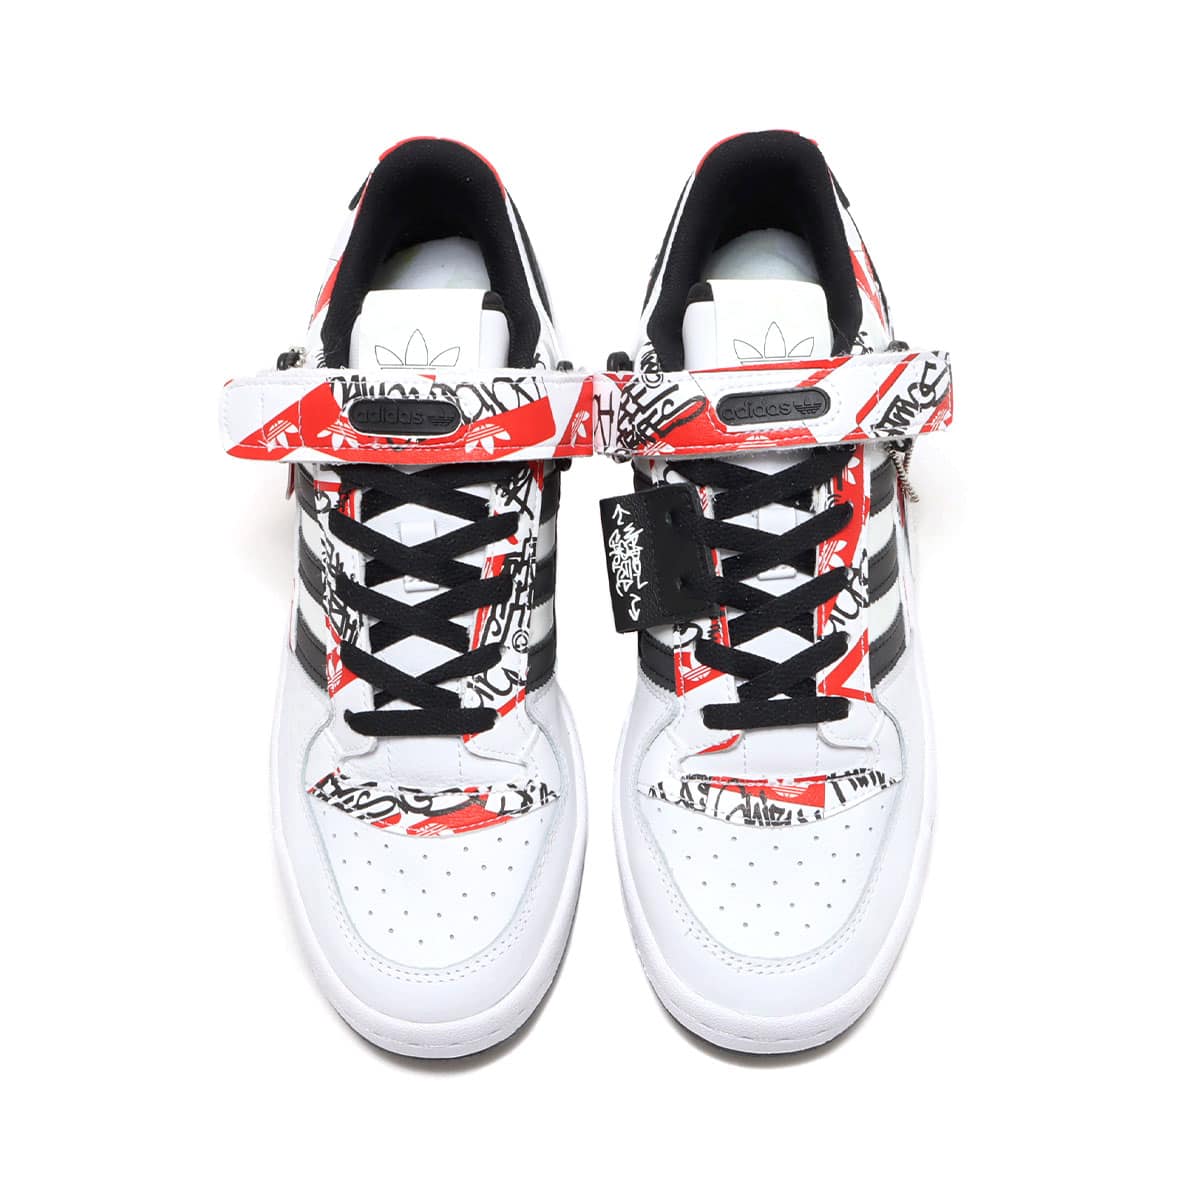 adidas FORUM LOW GRAFFITI atmos FOOTWEAR WHITE/CORE BLACK/ACTIVE RED 21FW-S